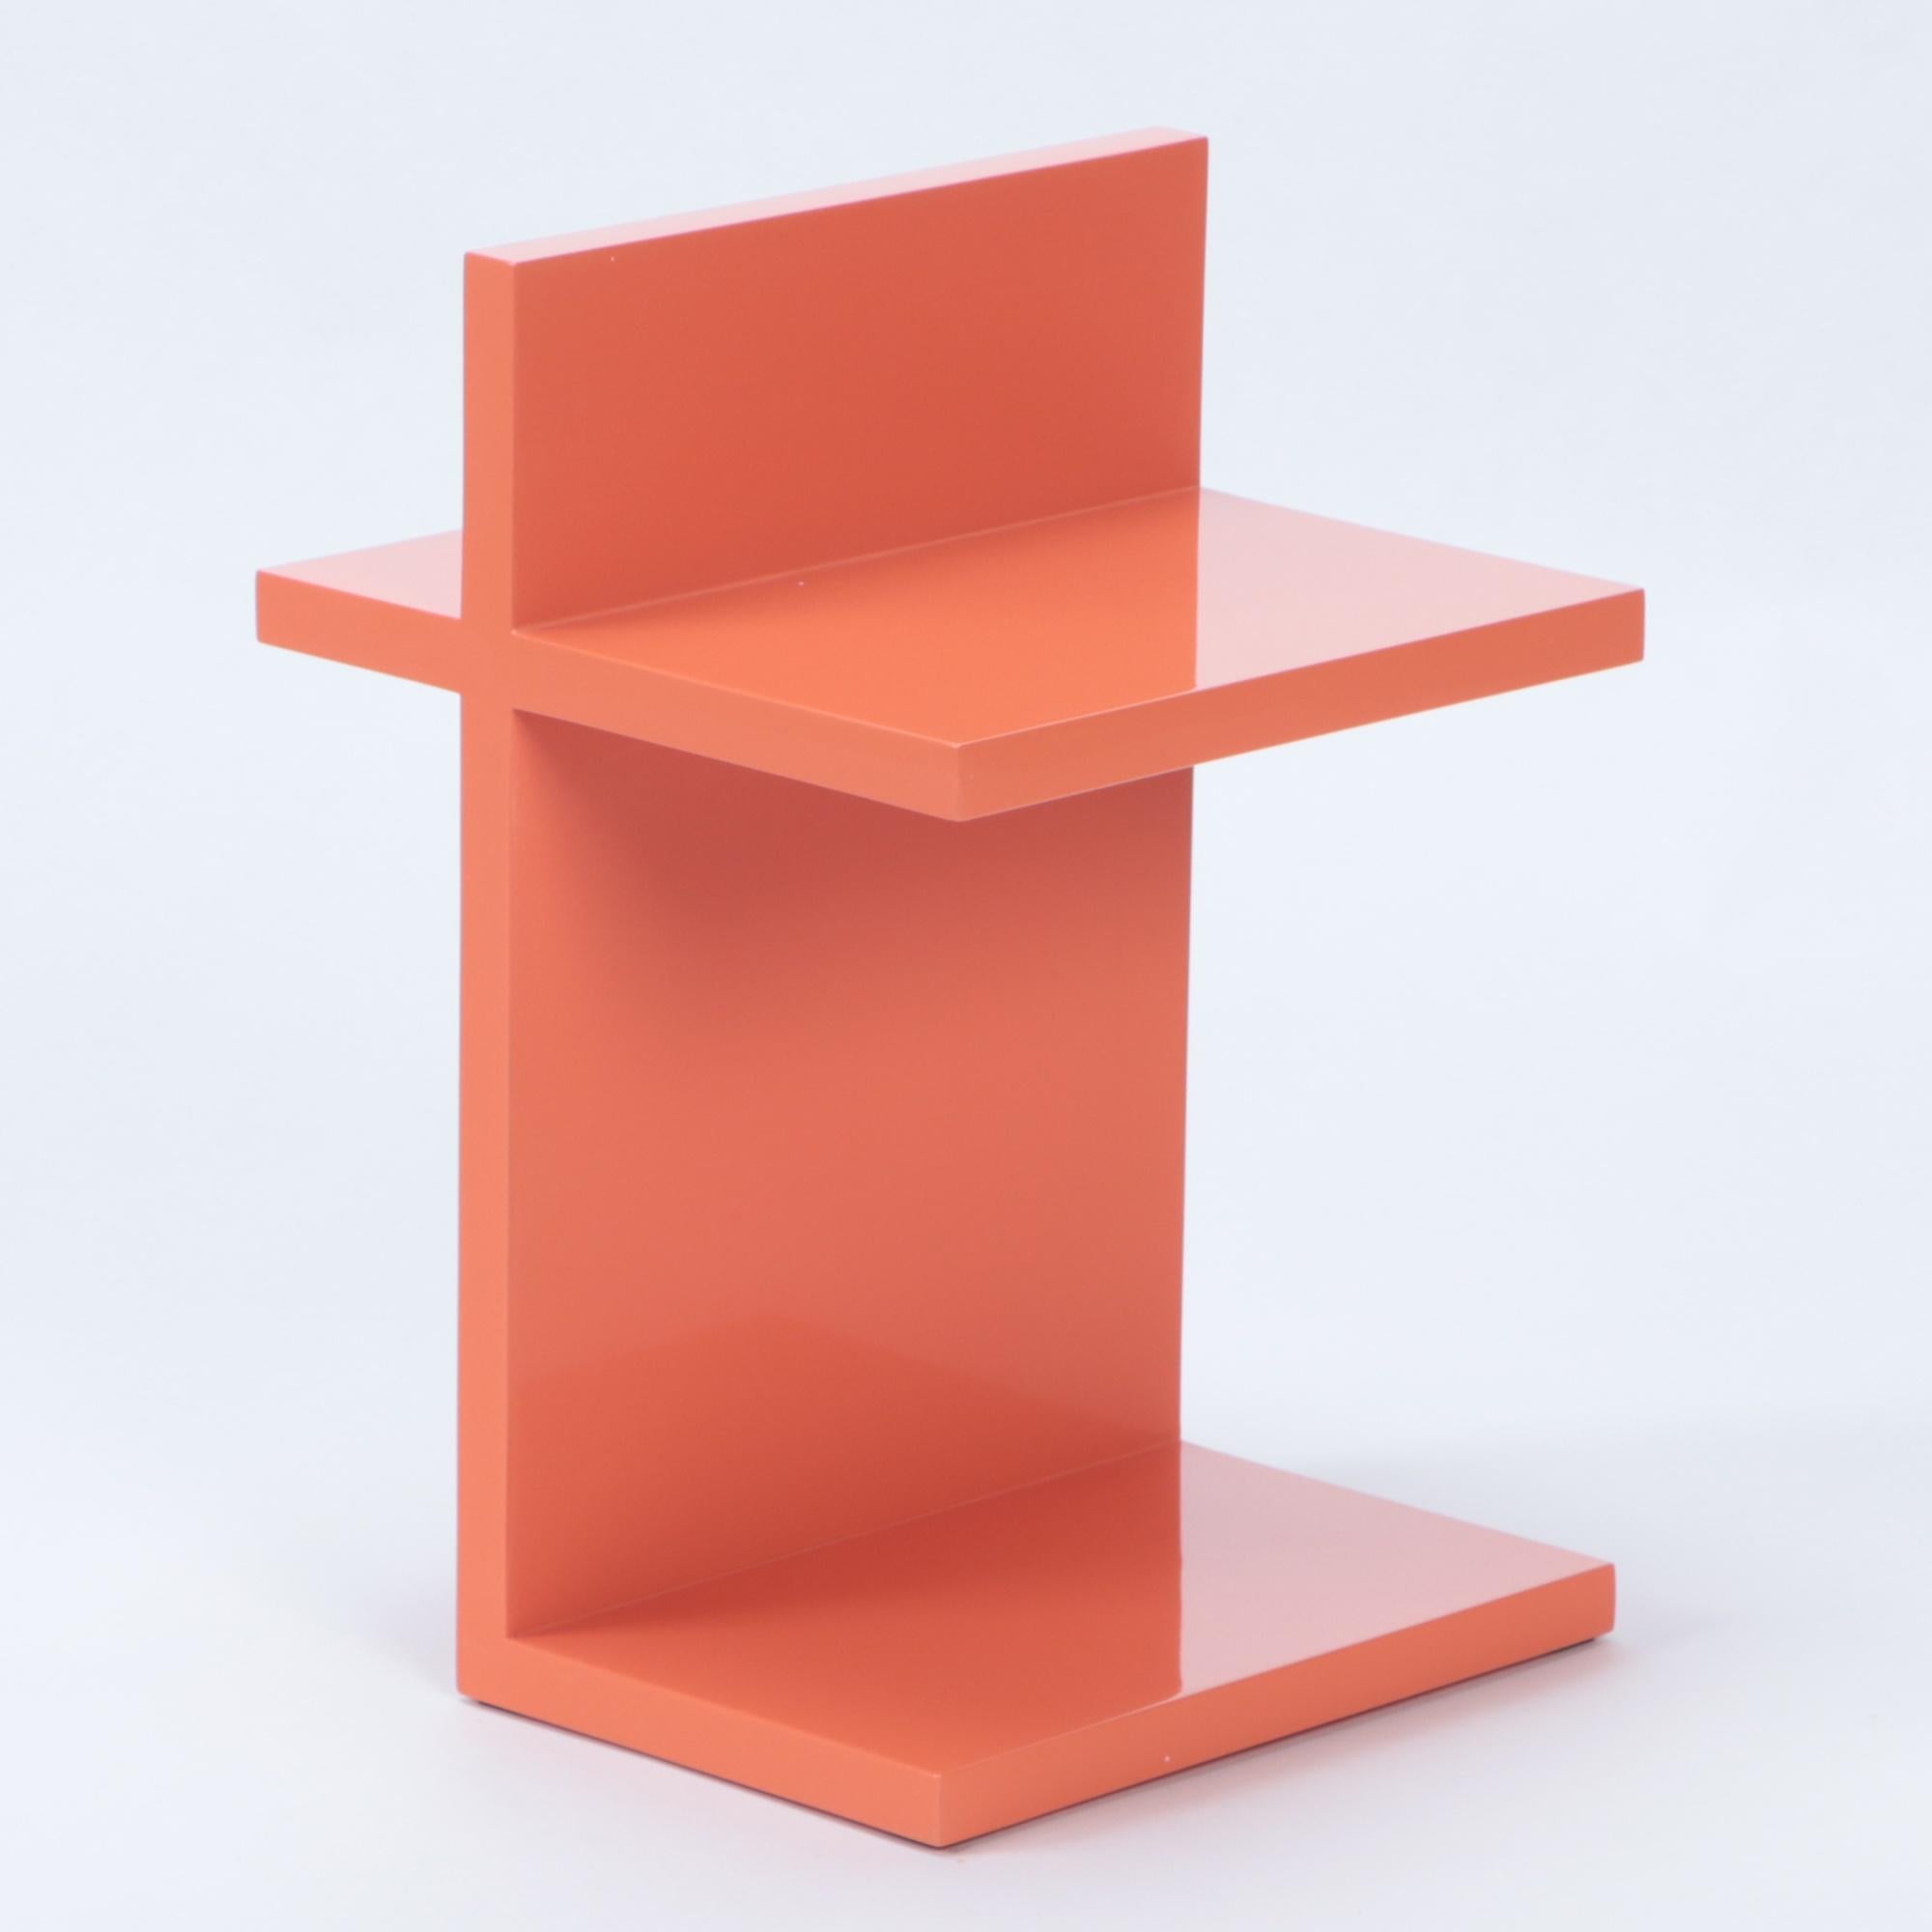 Designed by Maximilian Eicke for his brand Max ID NY.

These minimalistic side tables are made from Solid teak with high gloss lacquered Orange finish.

Designed as part of its original collection in 2010, the designer being a tea lover (not a